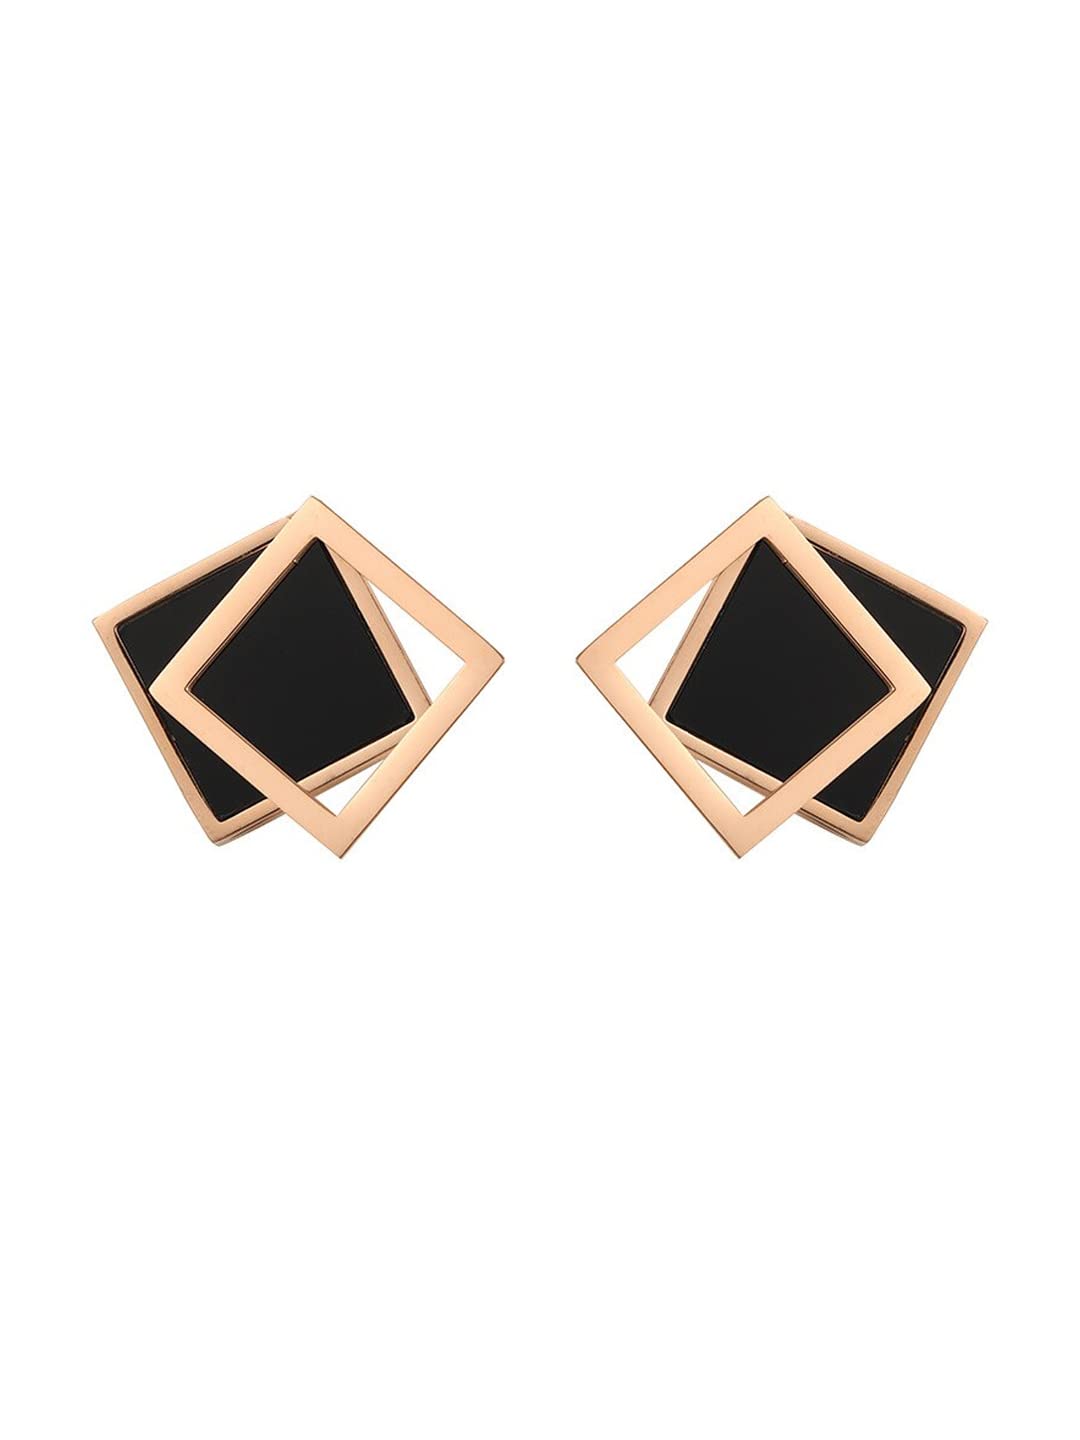 Yellow Chimes Stud Earrings for Women Western Rose Gold Plated Stainless Steel Black Square Studs Earrings For Women and Girls